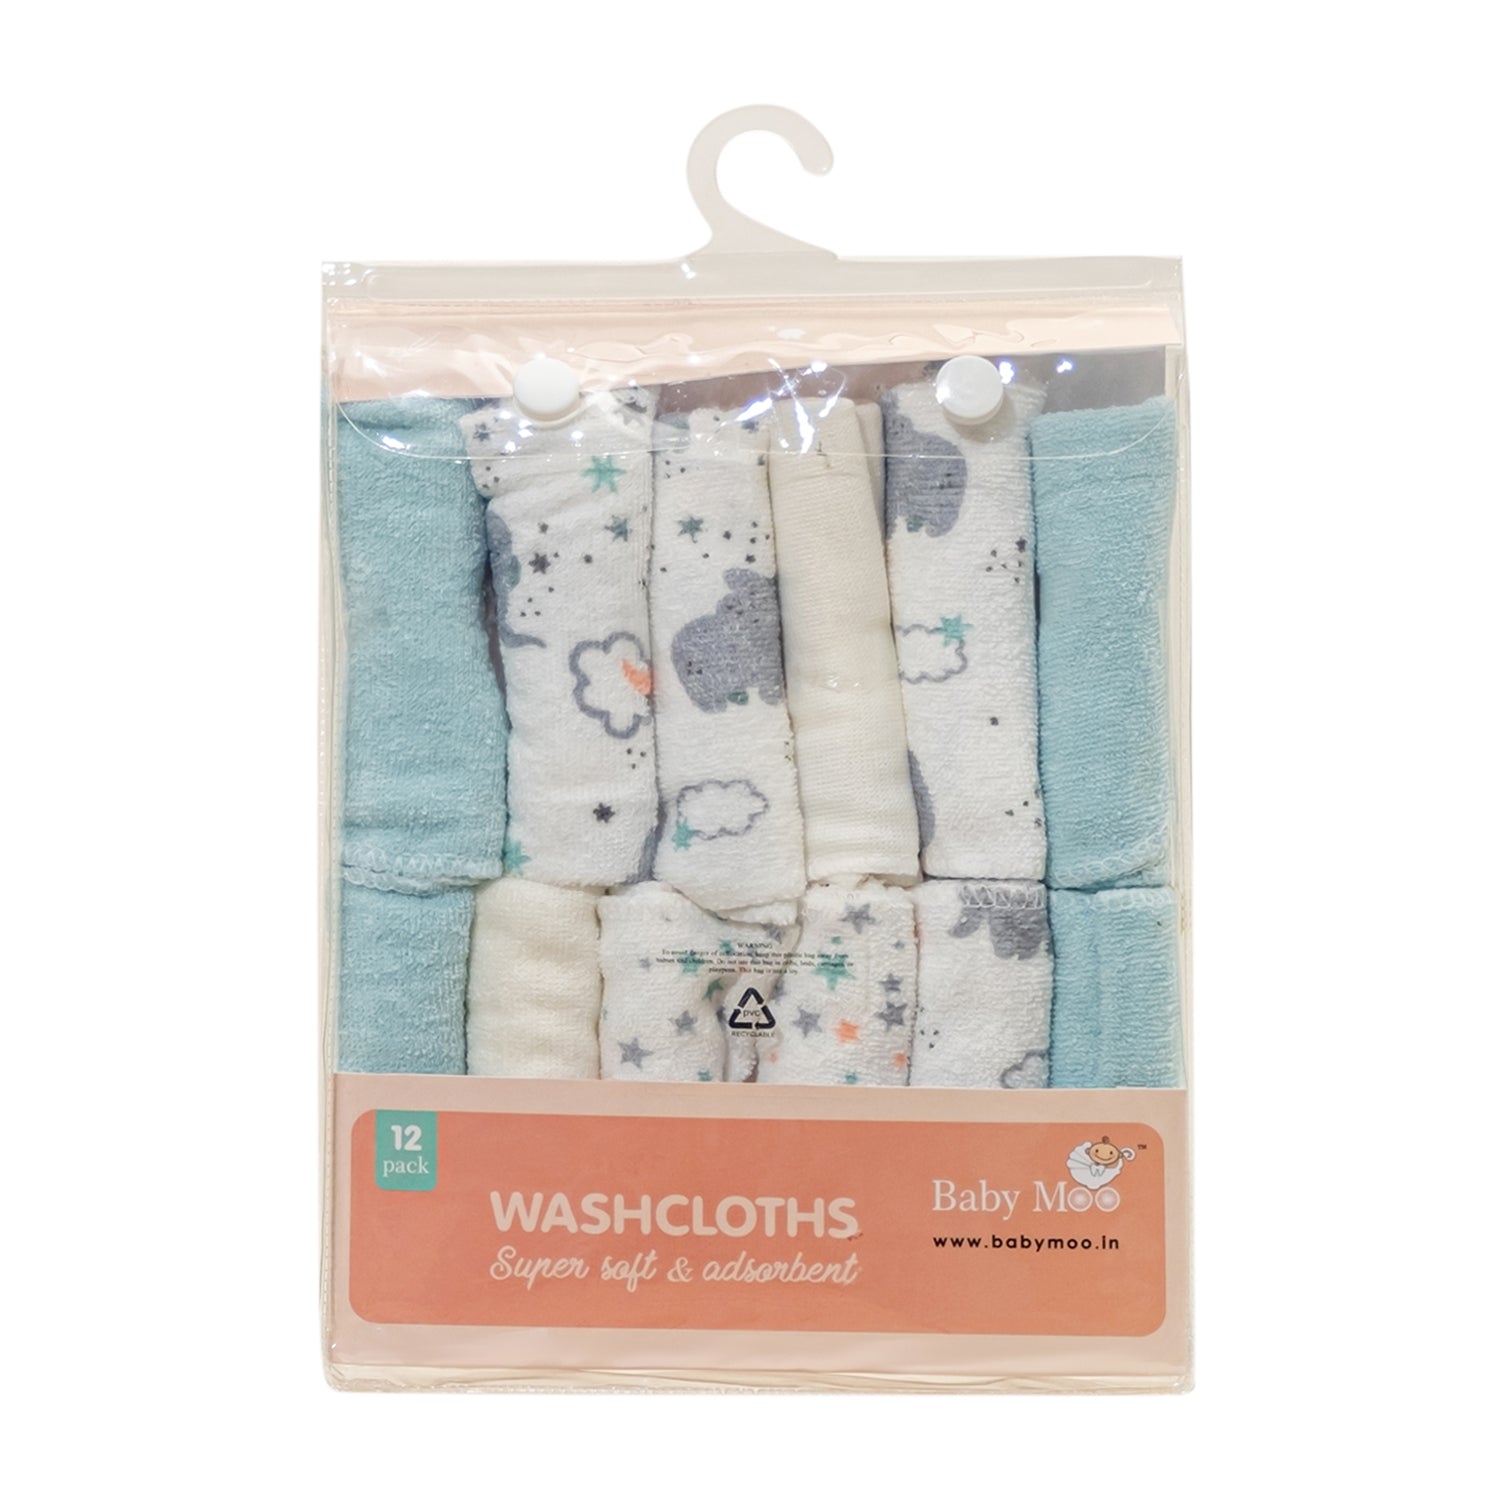 Baby Moo Elephant And Star Soft And Absorbent Handkerchief Napkins For Infant Face And Body Pack Of 12 Wash Cloth - Blue